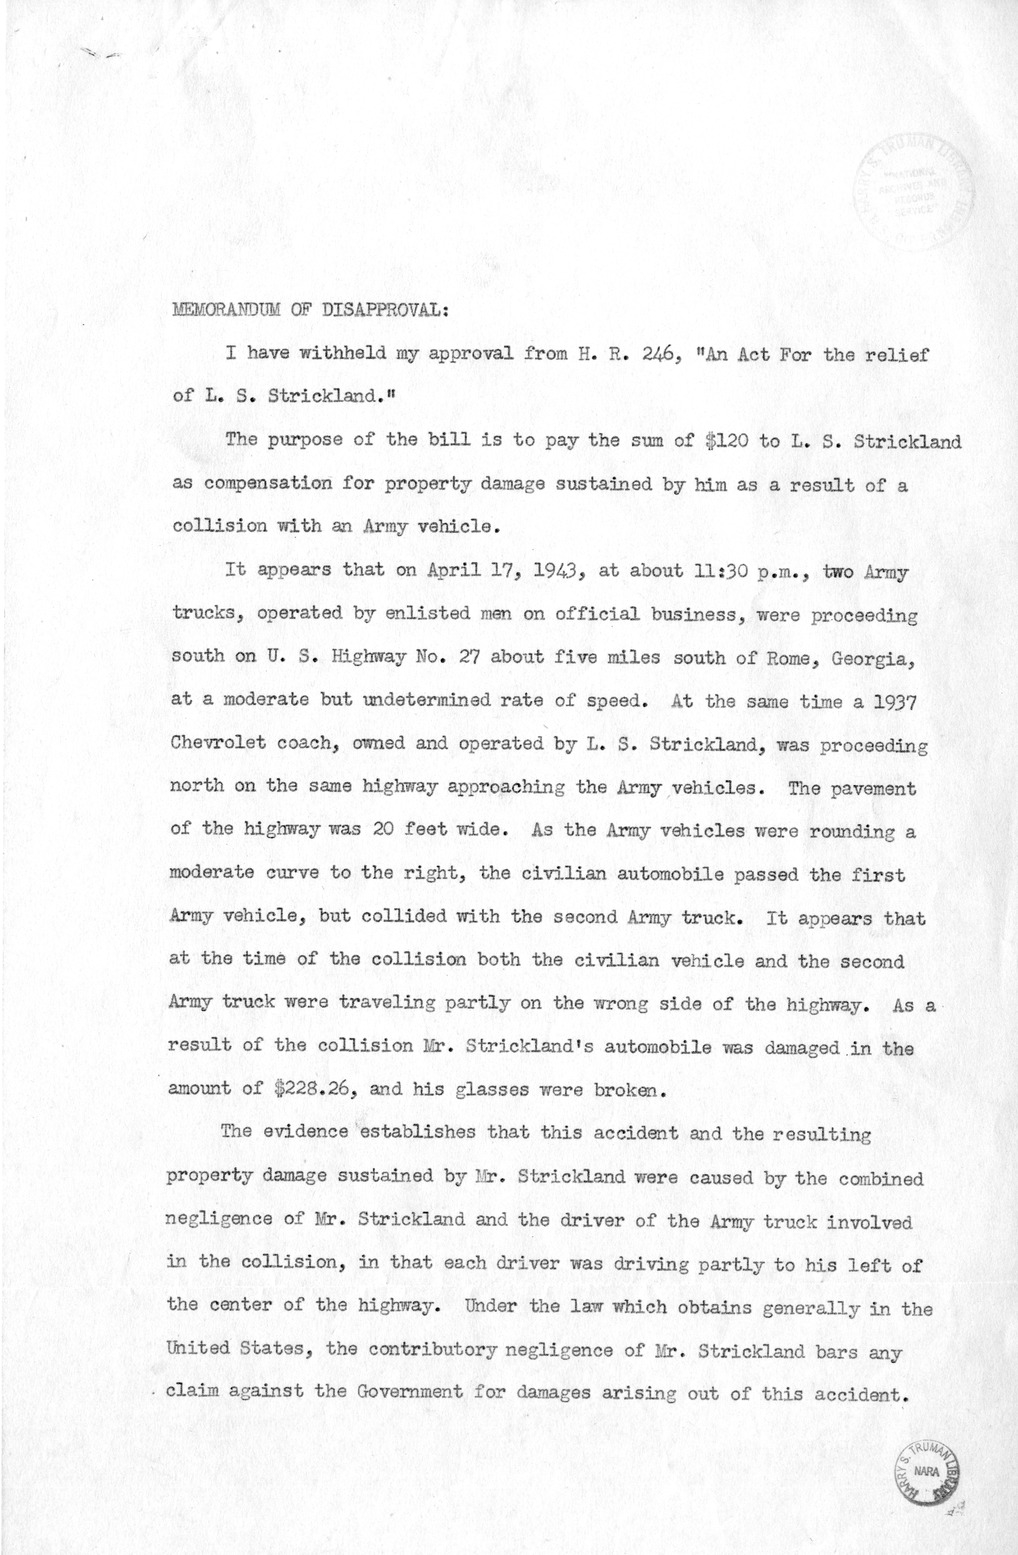 Memorandum from Harold D. Smith to M. C. Latta, H.R. 246, For the Relief of L. S. Strickland, with Attachments